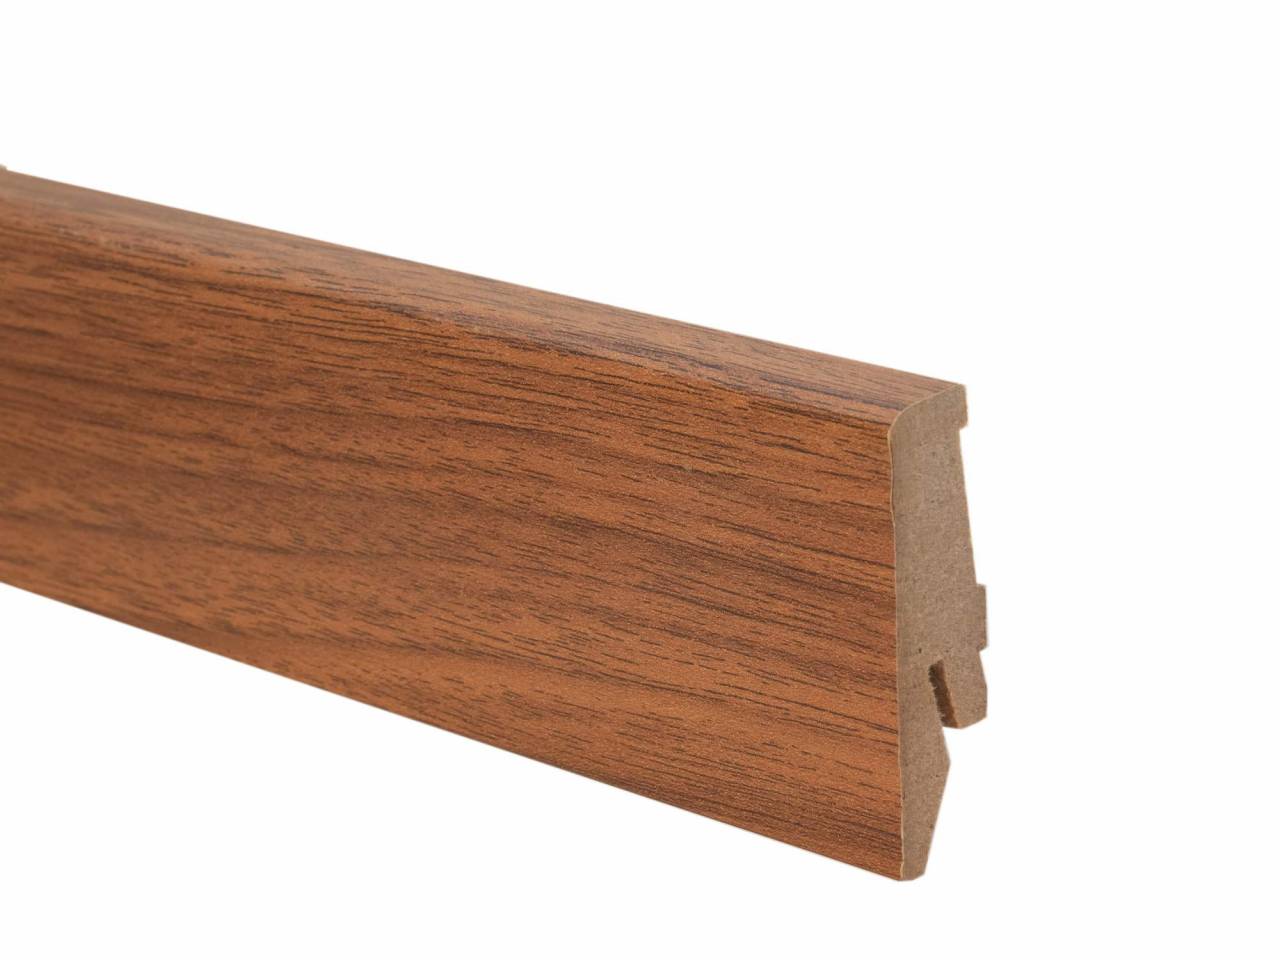 MDF wood floor sill with cable channel and height 58 mm. Suitable for laminate flooring in brown colour. Length 2.6 m.